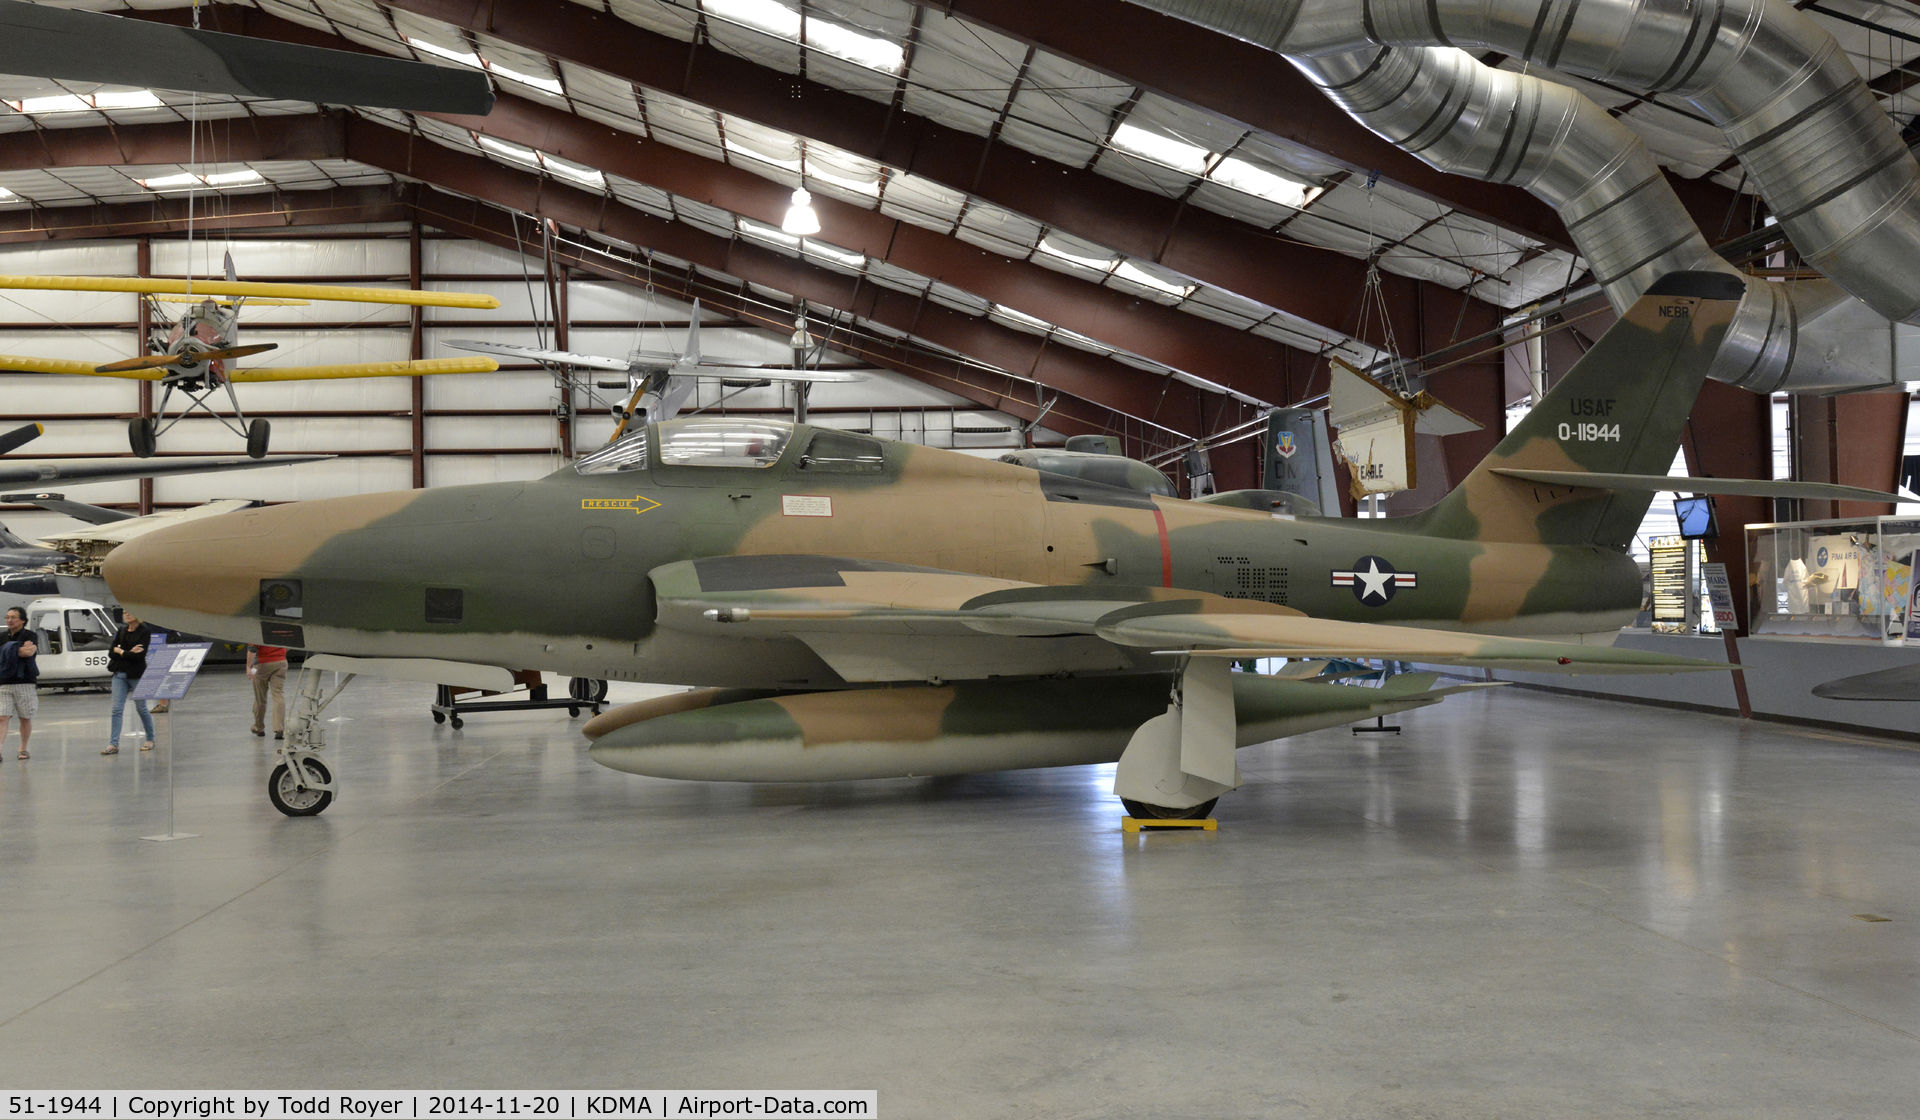 51-1944, Republic RF-84F Thunderflash C/N Not found 51-1944, On display at the Pima air and Space Museum